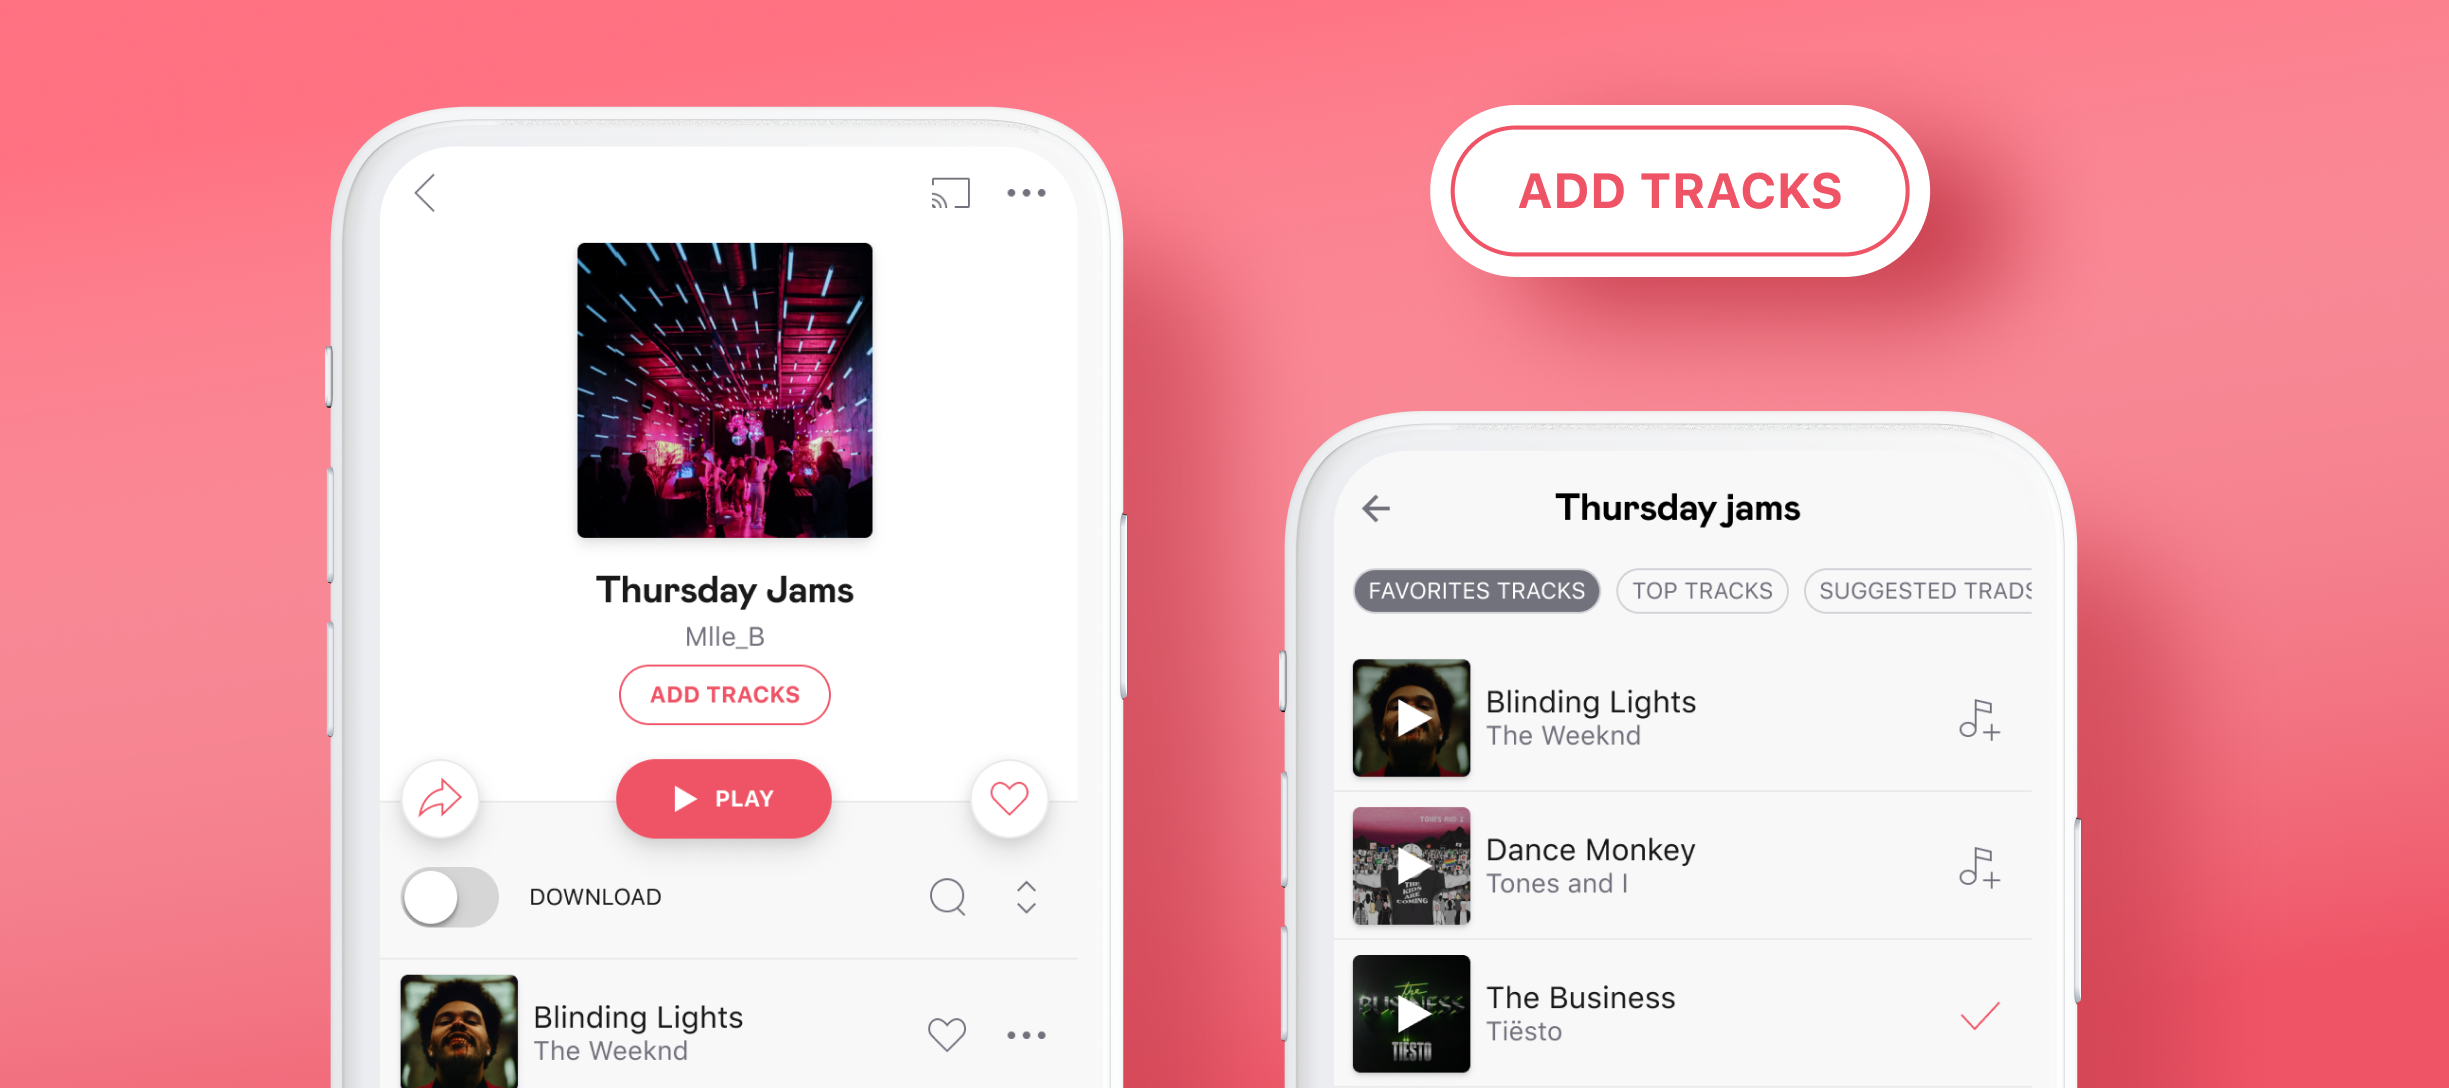 Need a hand creating that top playlist? Deezer can help!